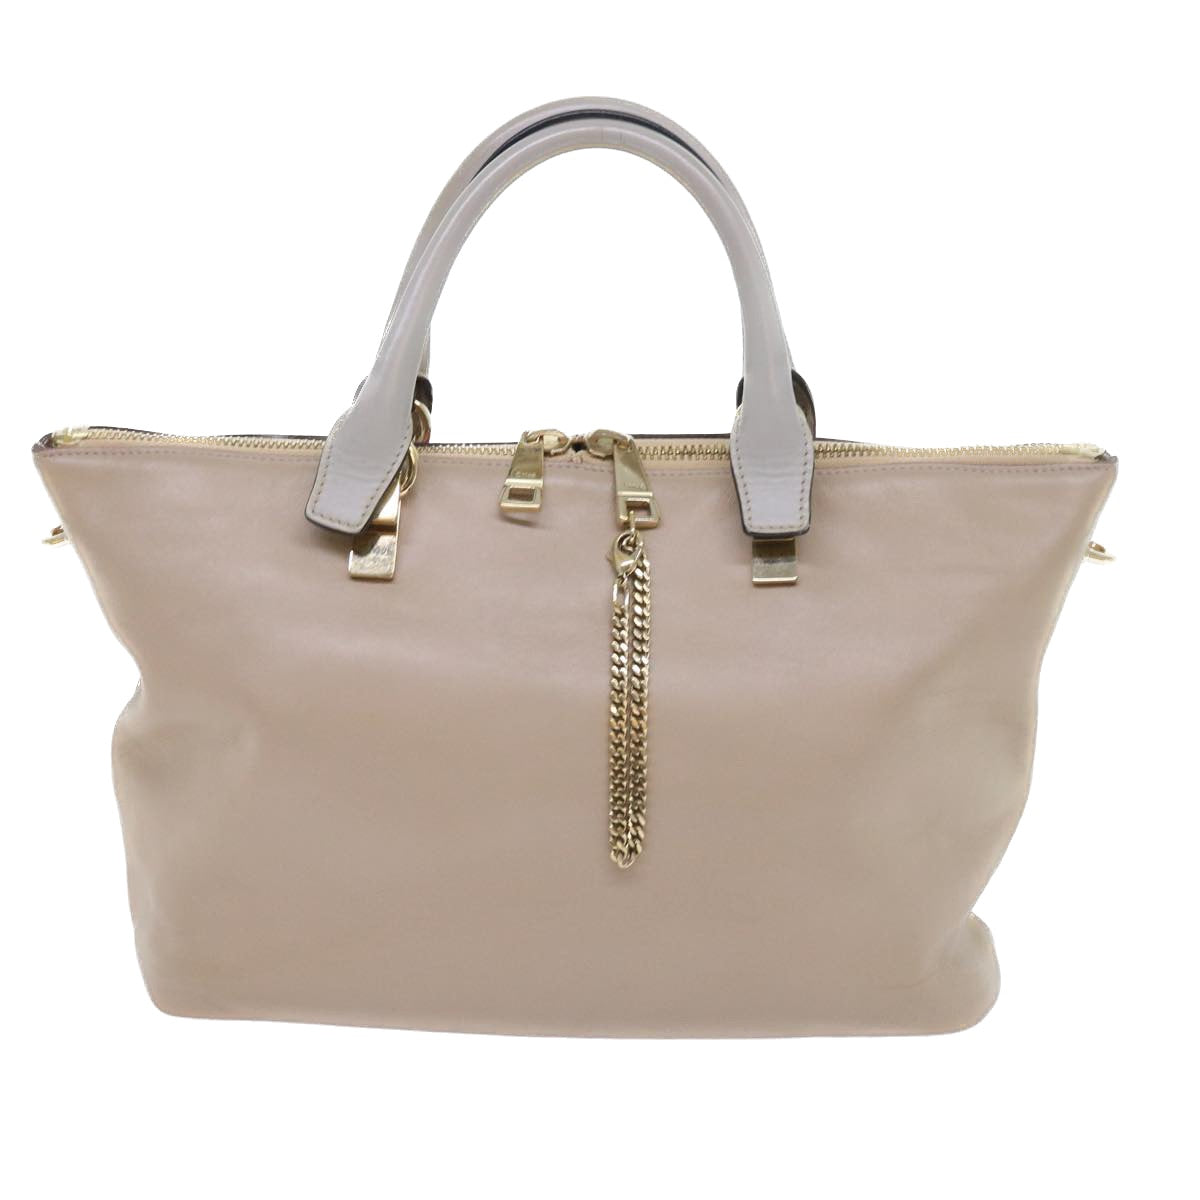 Chloe Hand Bag Leather 2way Beige Auth bs8954